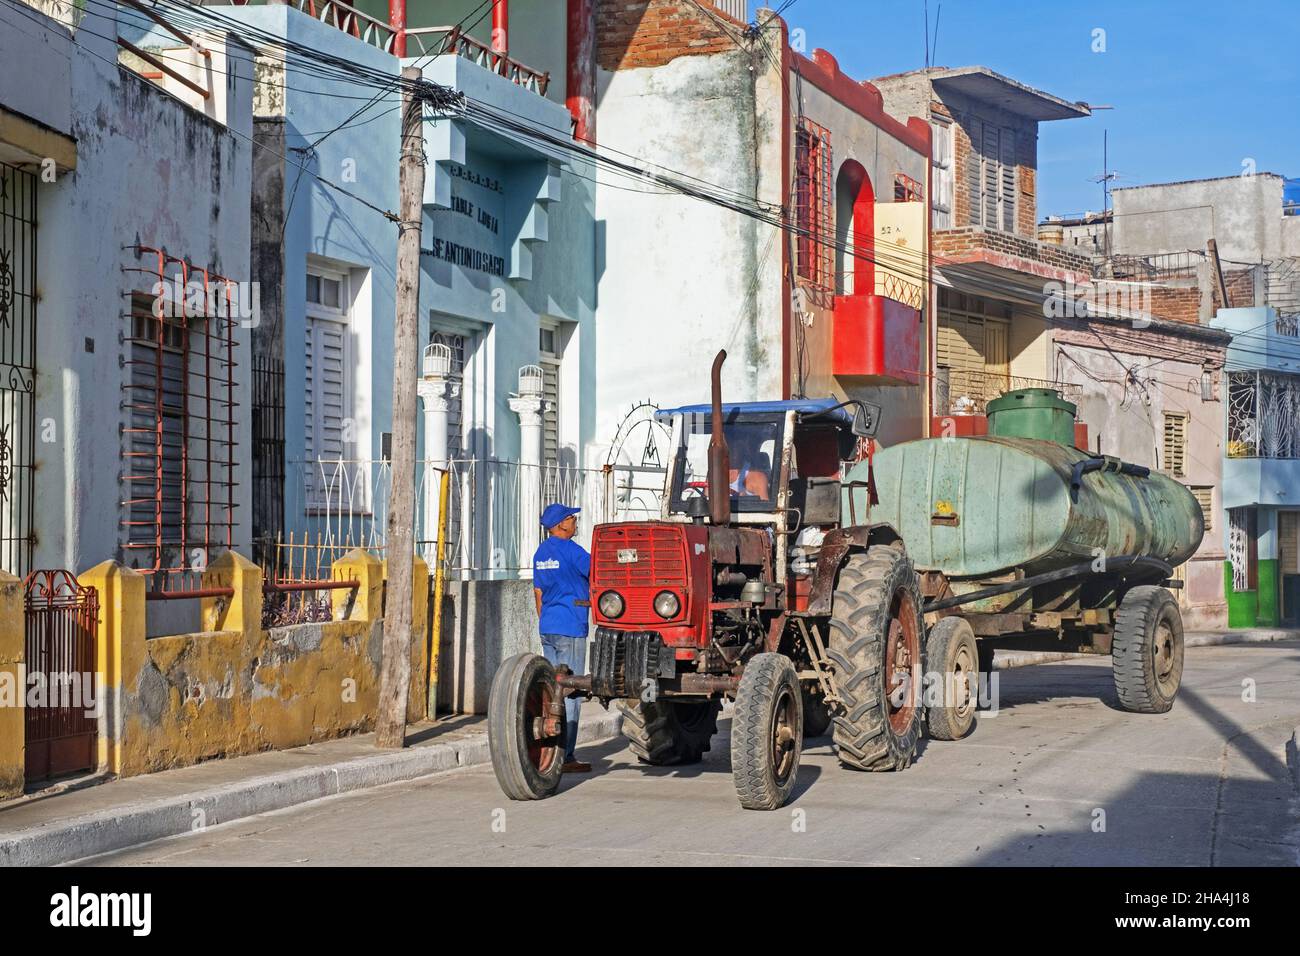 Tractor with trailer for emptying septic tanks / cesspits on the street in the city Bayamo, Granma Province, Oriente region on island Cuba, Caribbean Stock Photo